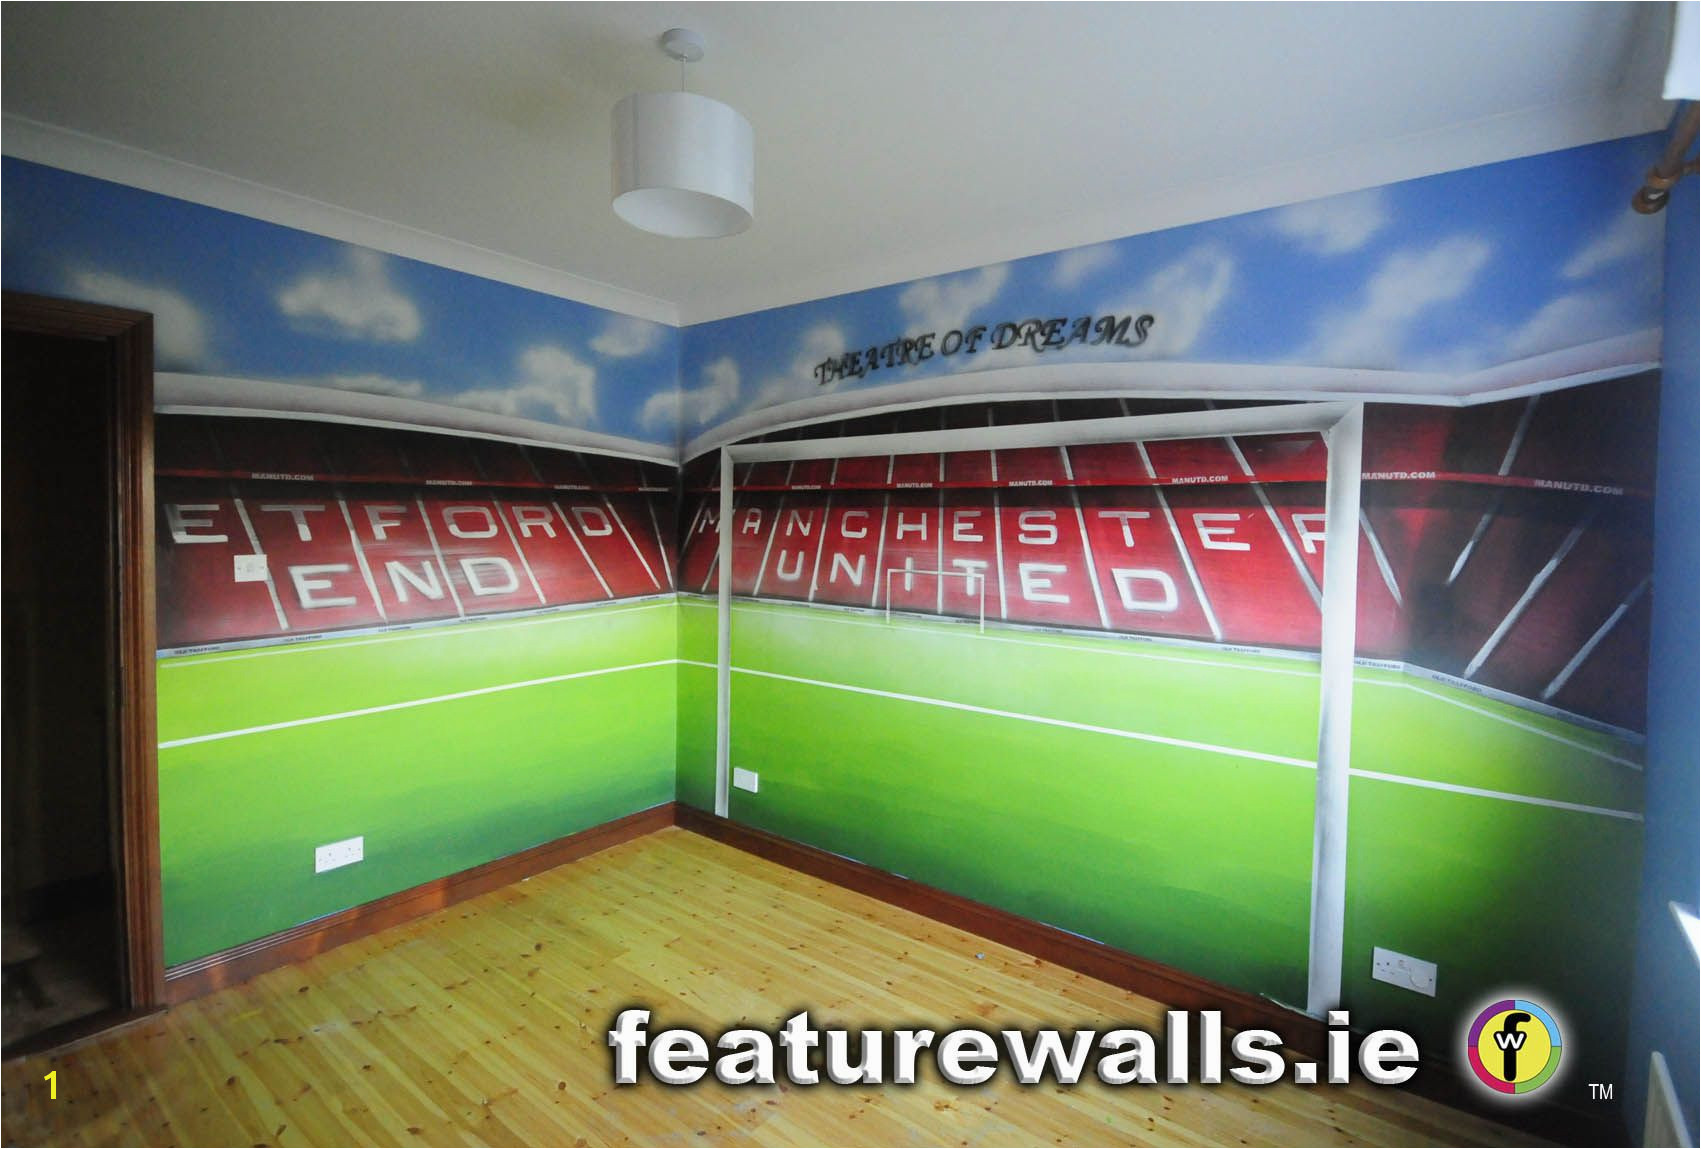 Manchester United Wall Mural Hand Painted Manchester United Old Trafford Kids Room Mural by